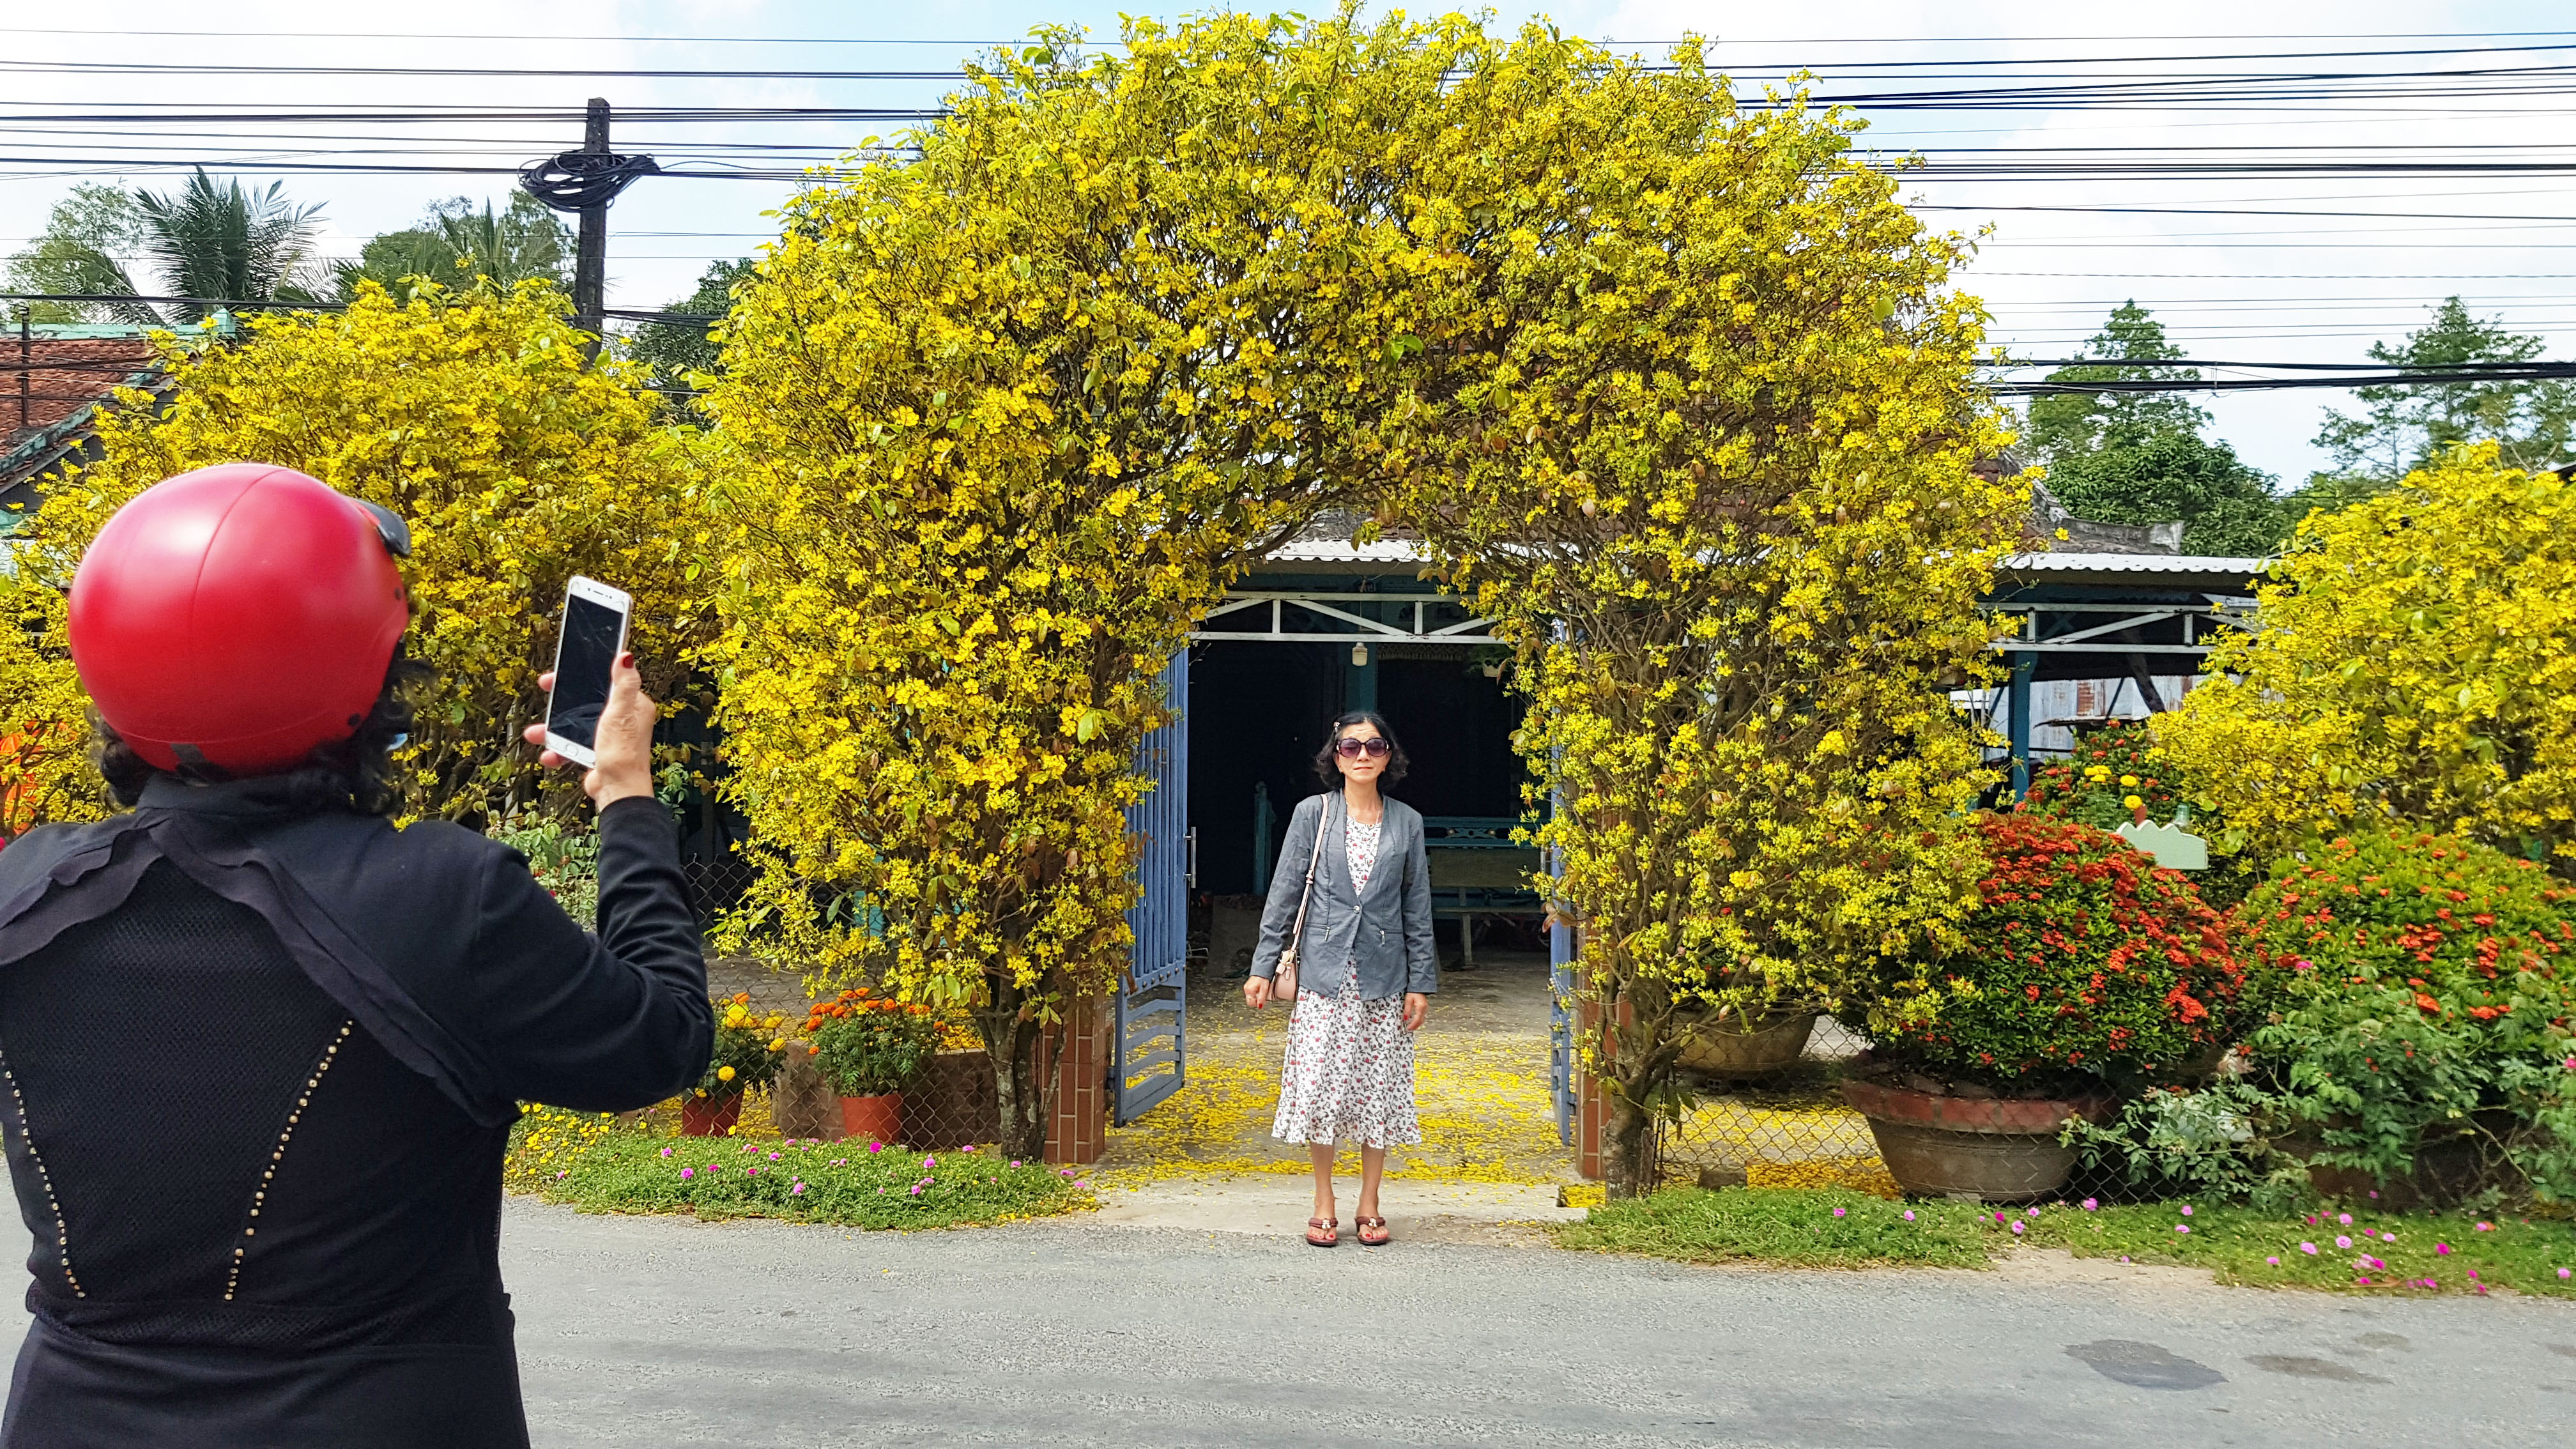 People take pictures with a four-meter-high gate grown from two yellow apricot blossom trees in the Mekong Delta province of An Giang’s Thoai Son District on February 3, 2022. Photo: Ngoc Khai / Tuoi Tre